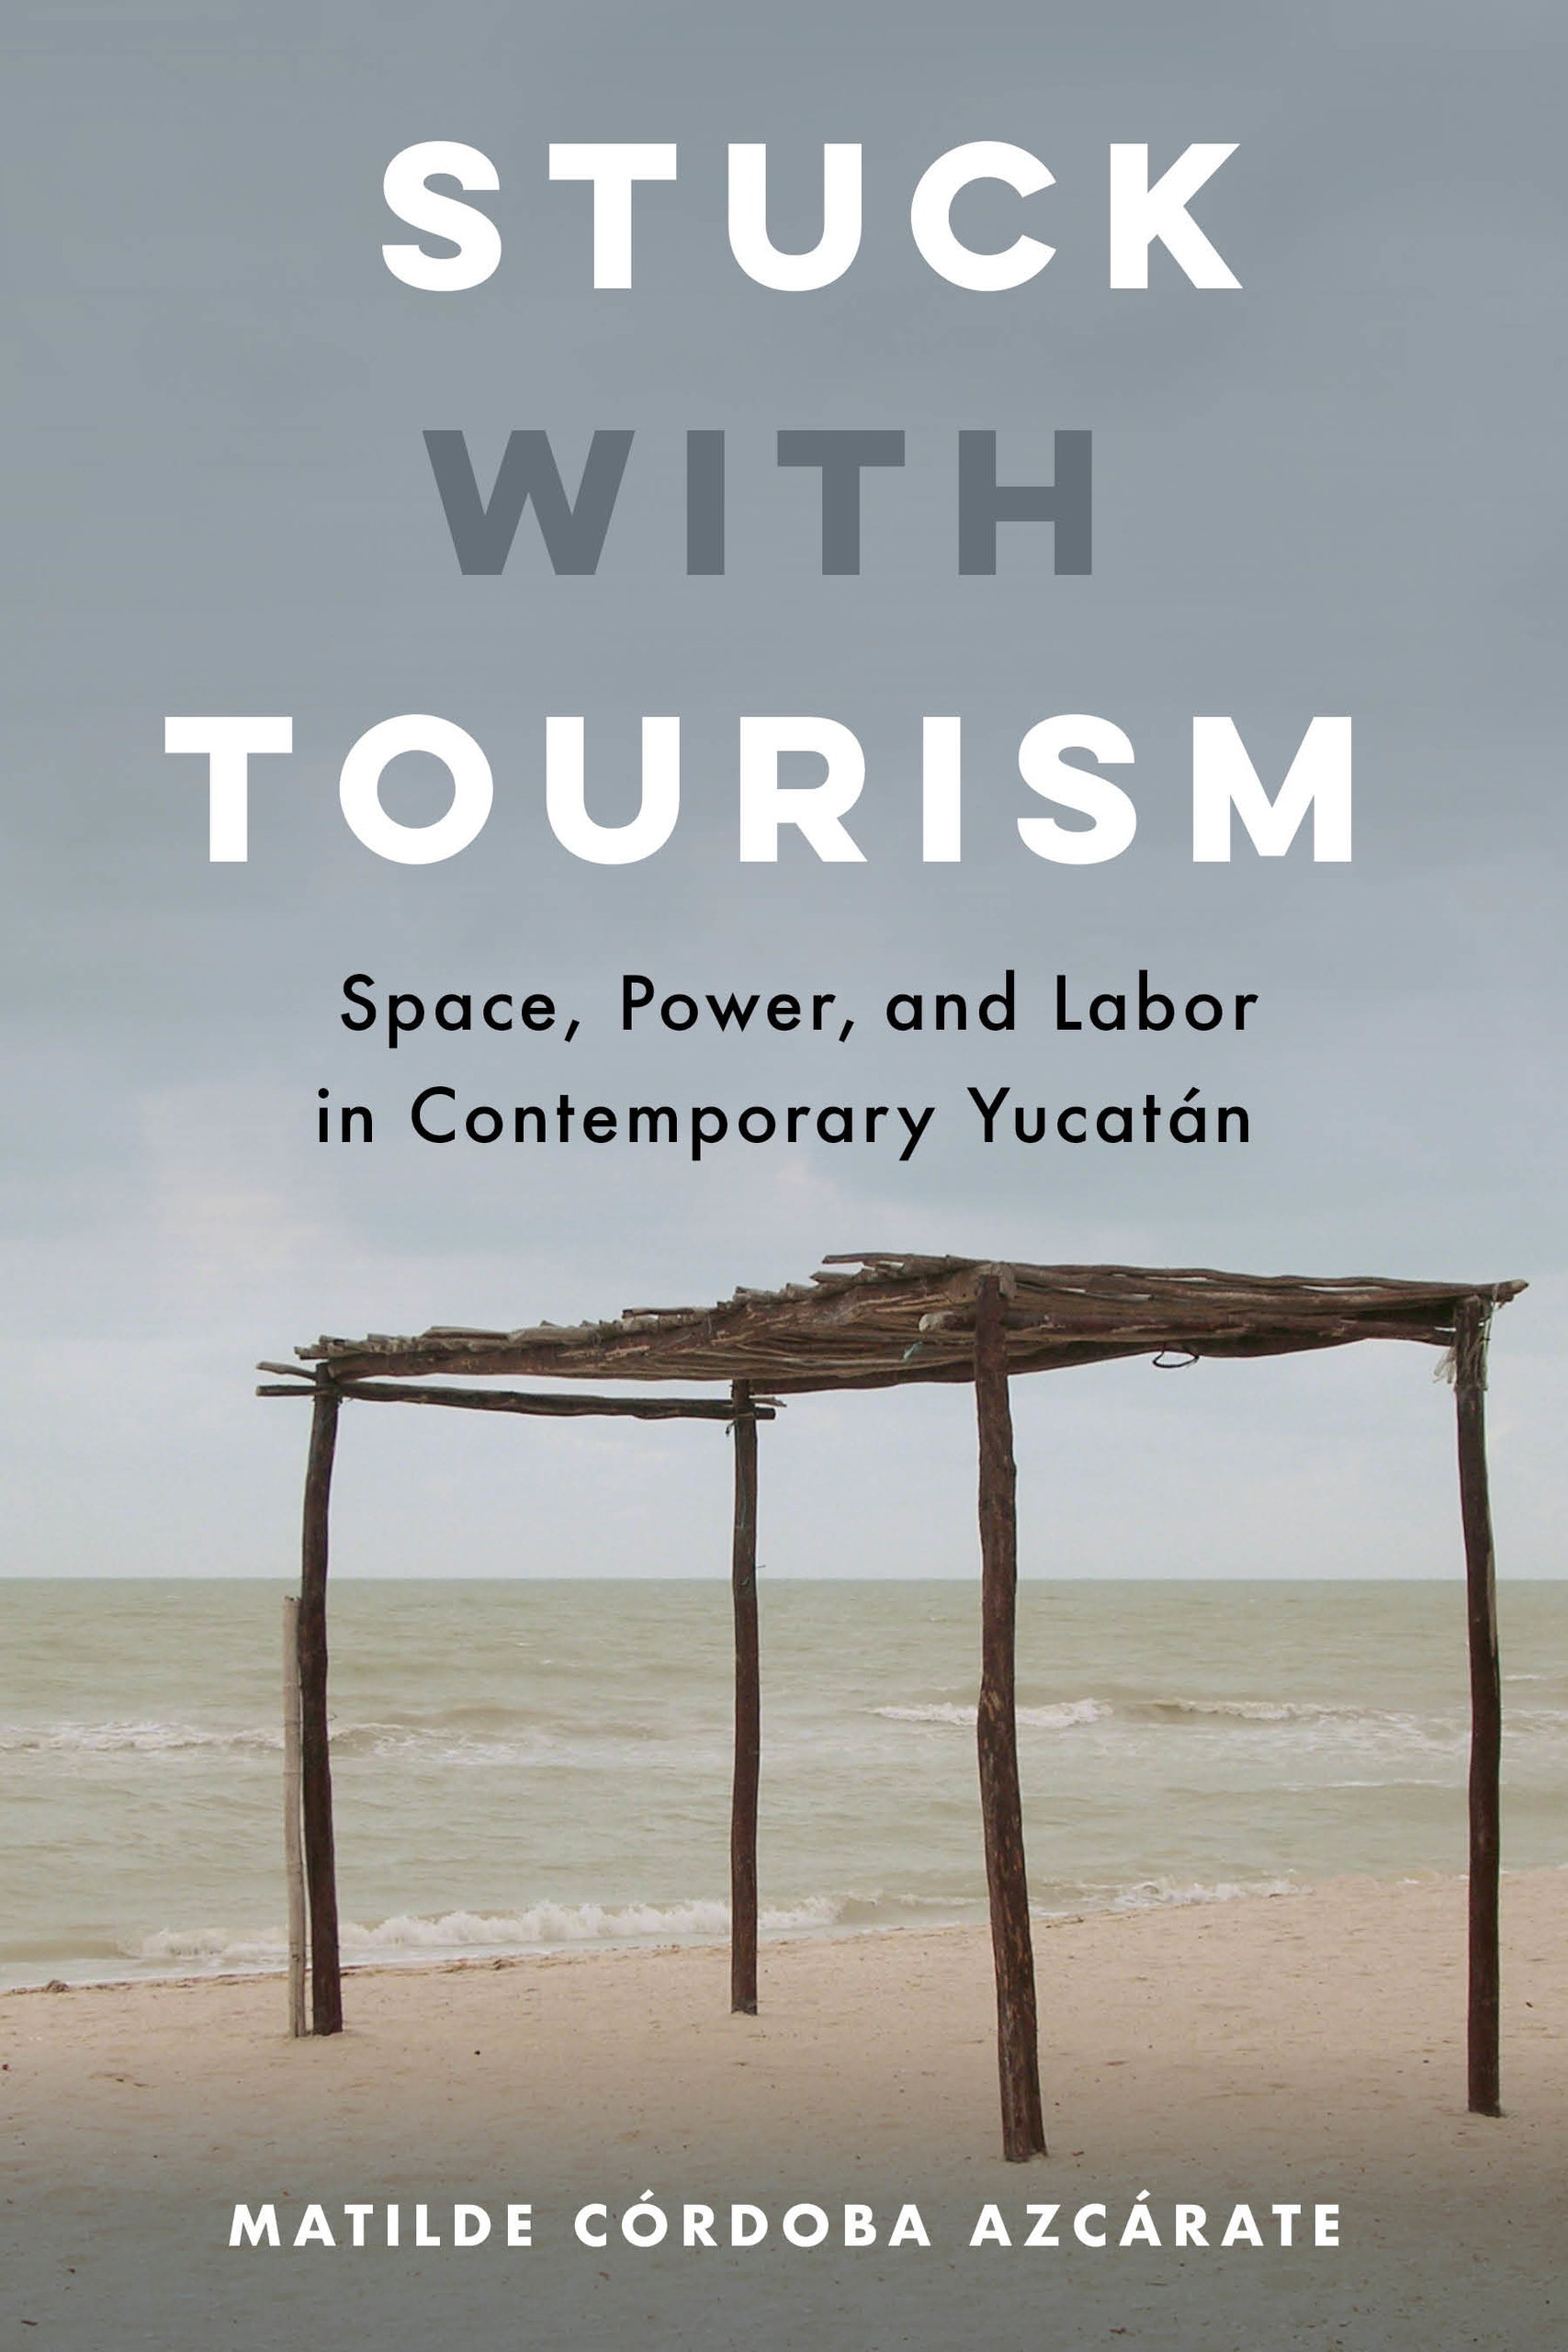 book cover of Córdoba Azcárate's "Stuck with Tourism" showing a wooden structure in the desert